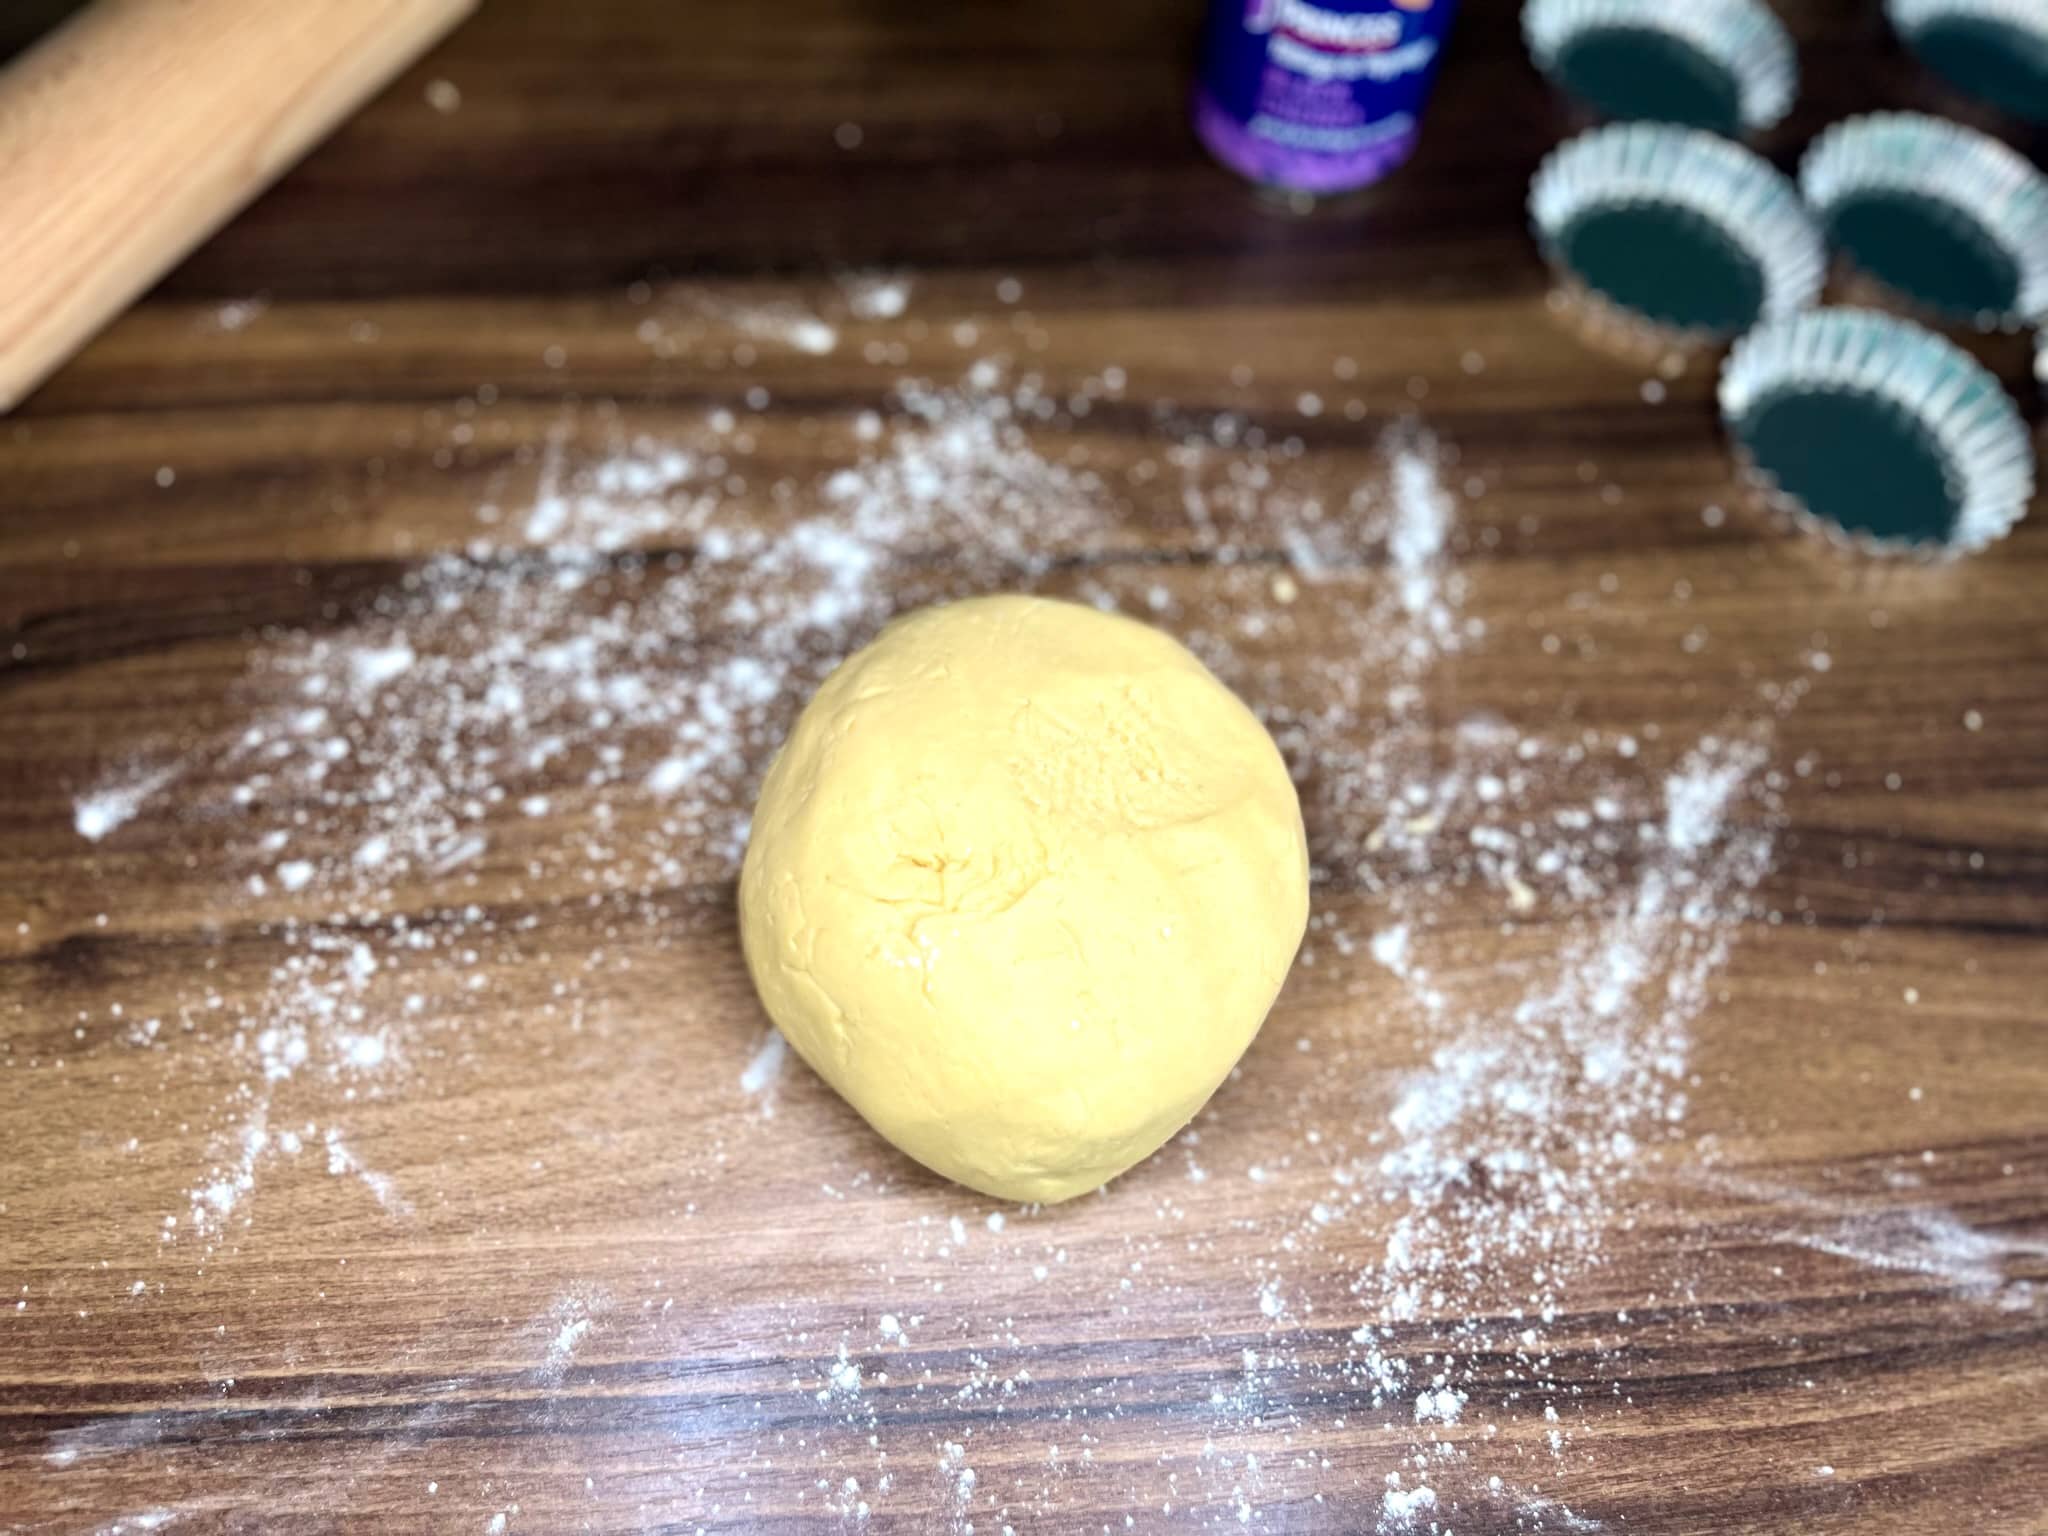 A ball of dough has been formed on the floured tabletop